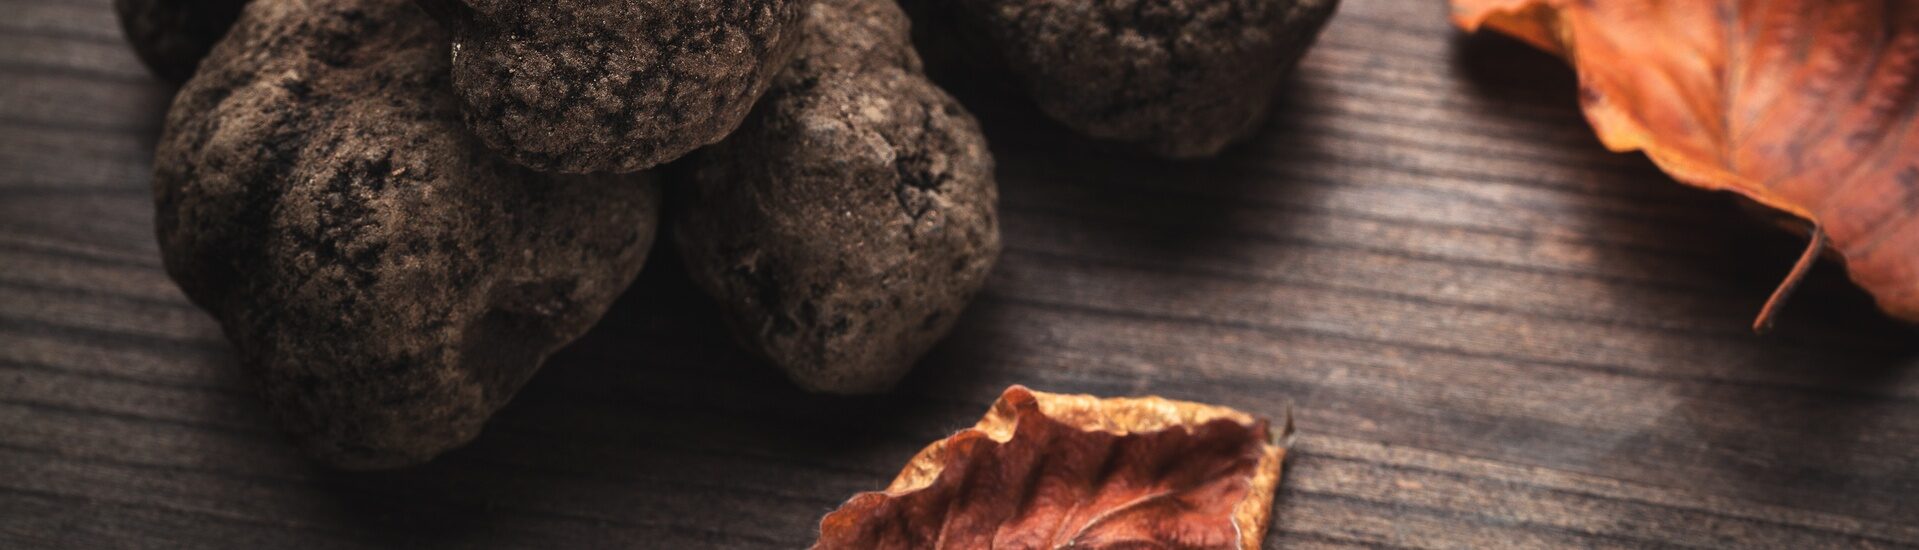 UNECE STANDARD FFV-53 concerning the marketing and commercial quality control of Truffles 2017 edition